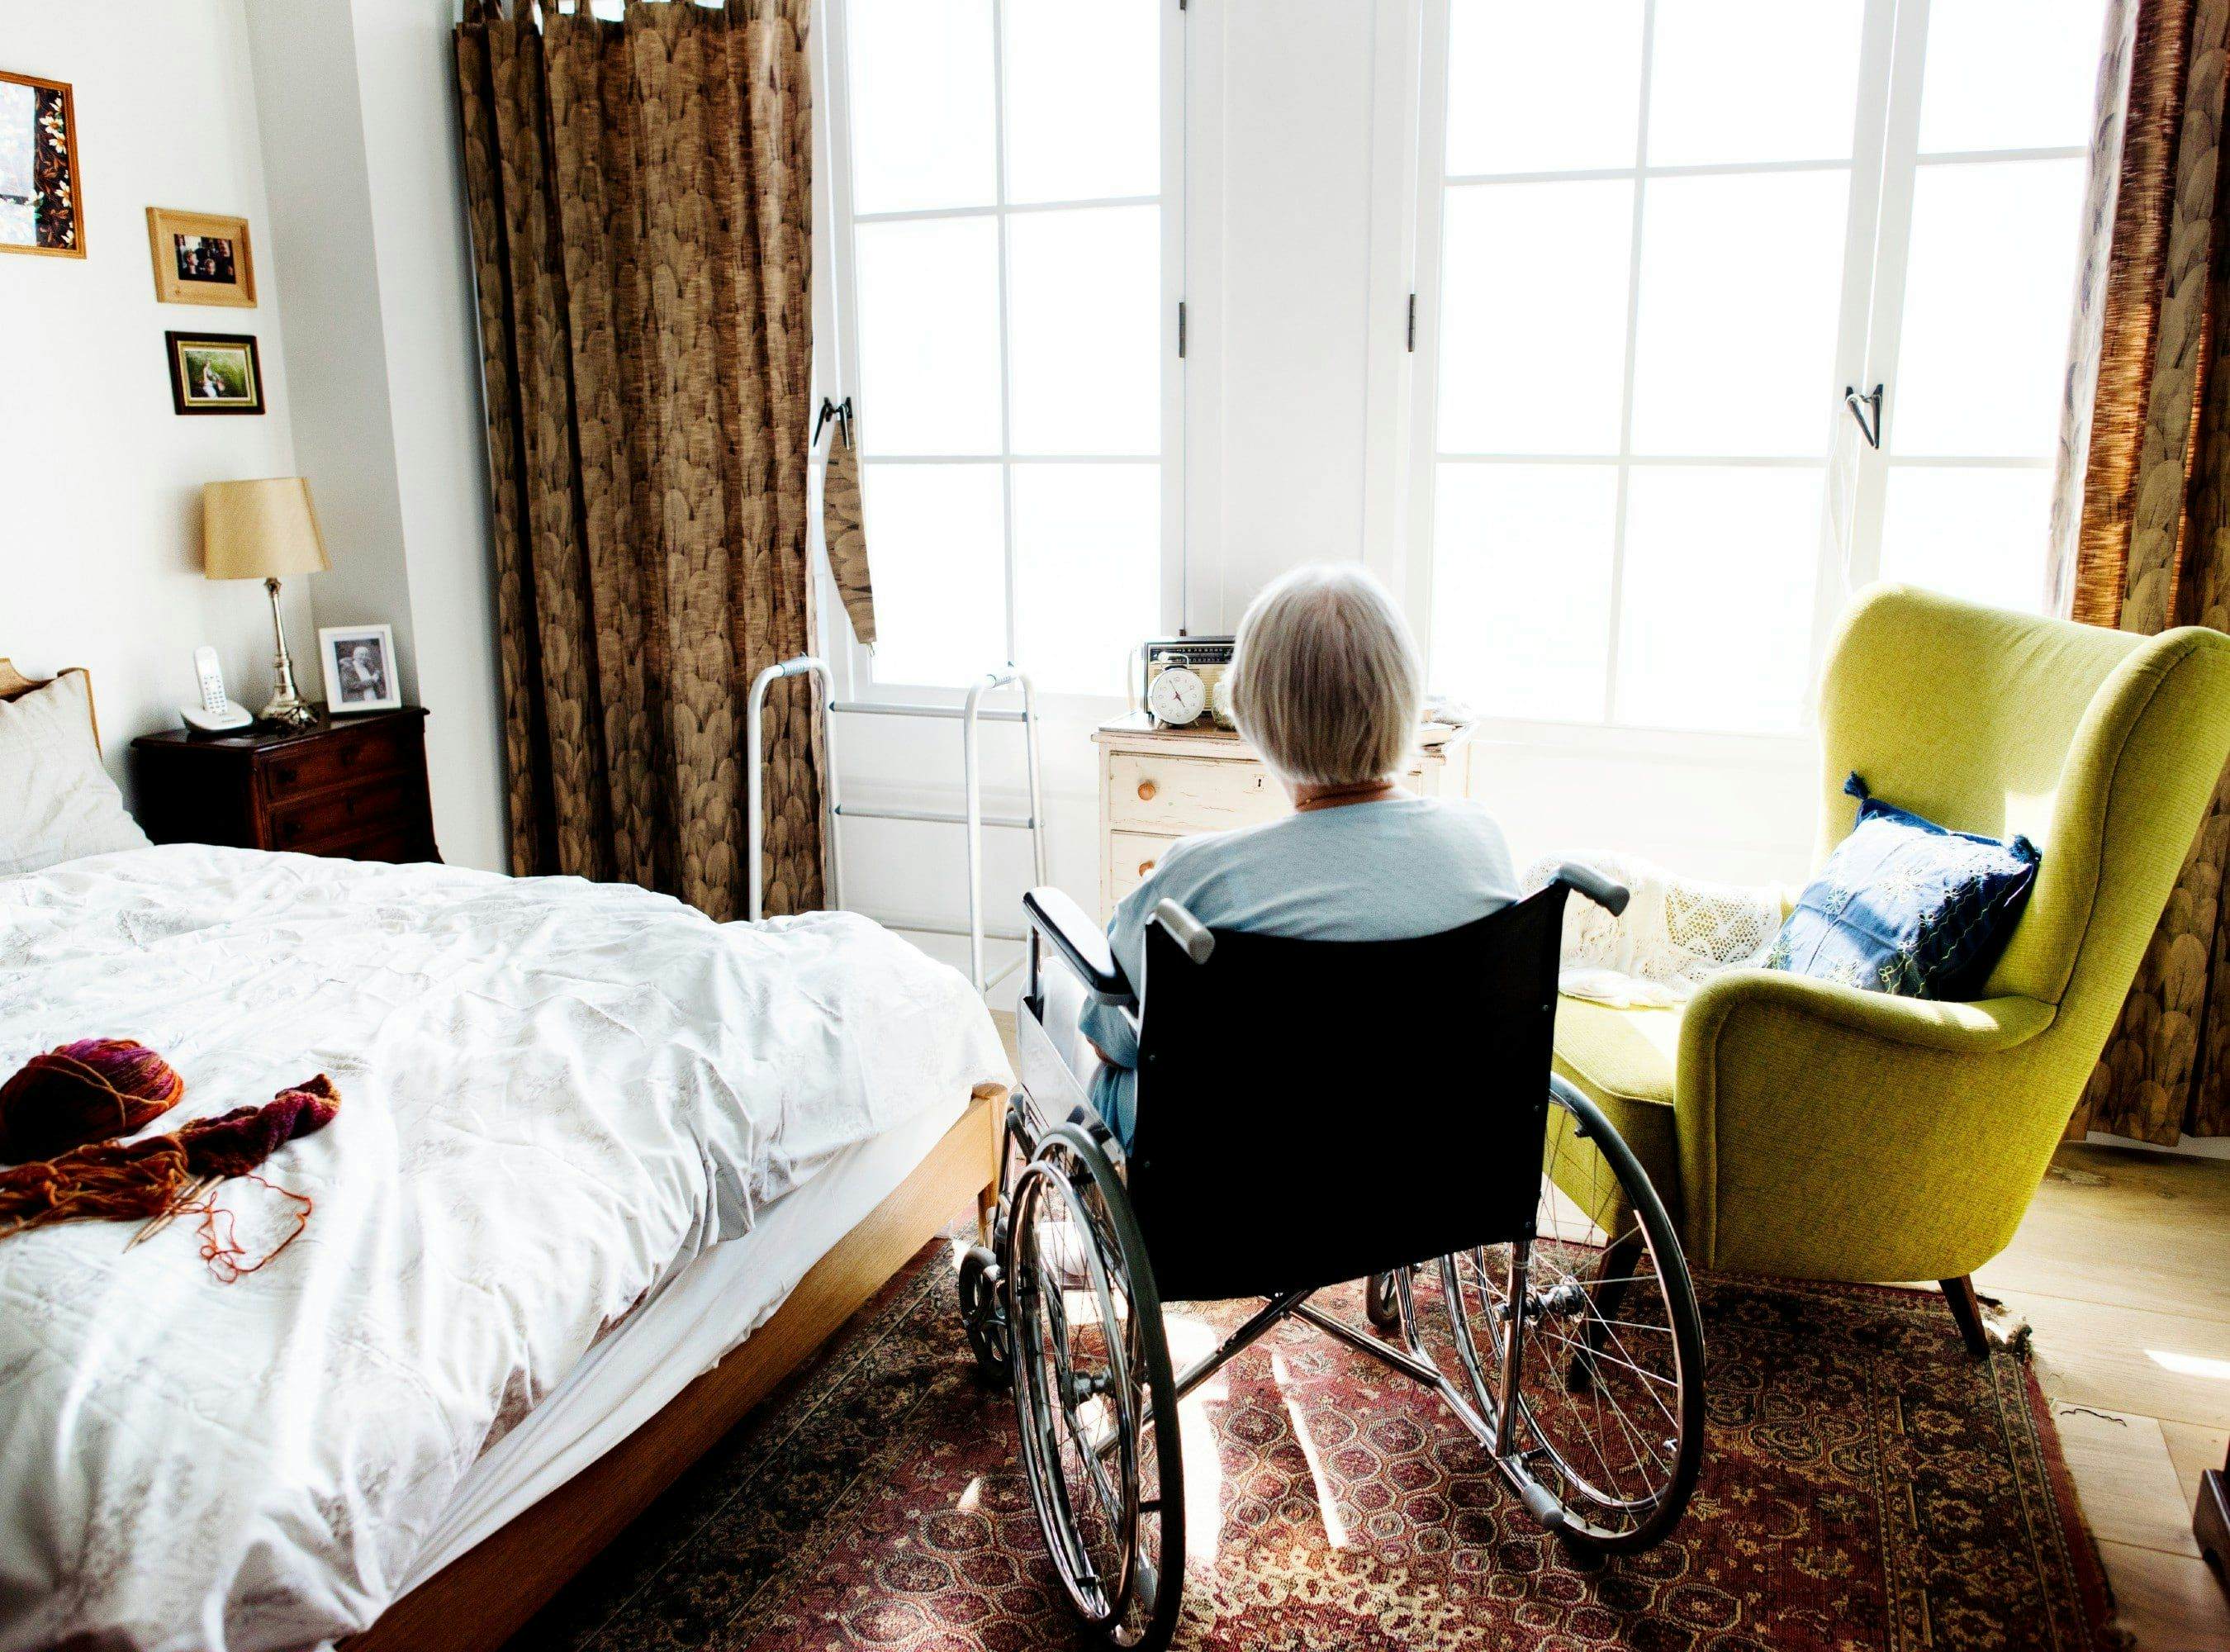 Nursing Homes, Hit Hard by COVID-19, May Soon Face Lawsuits